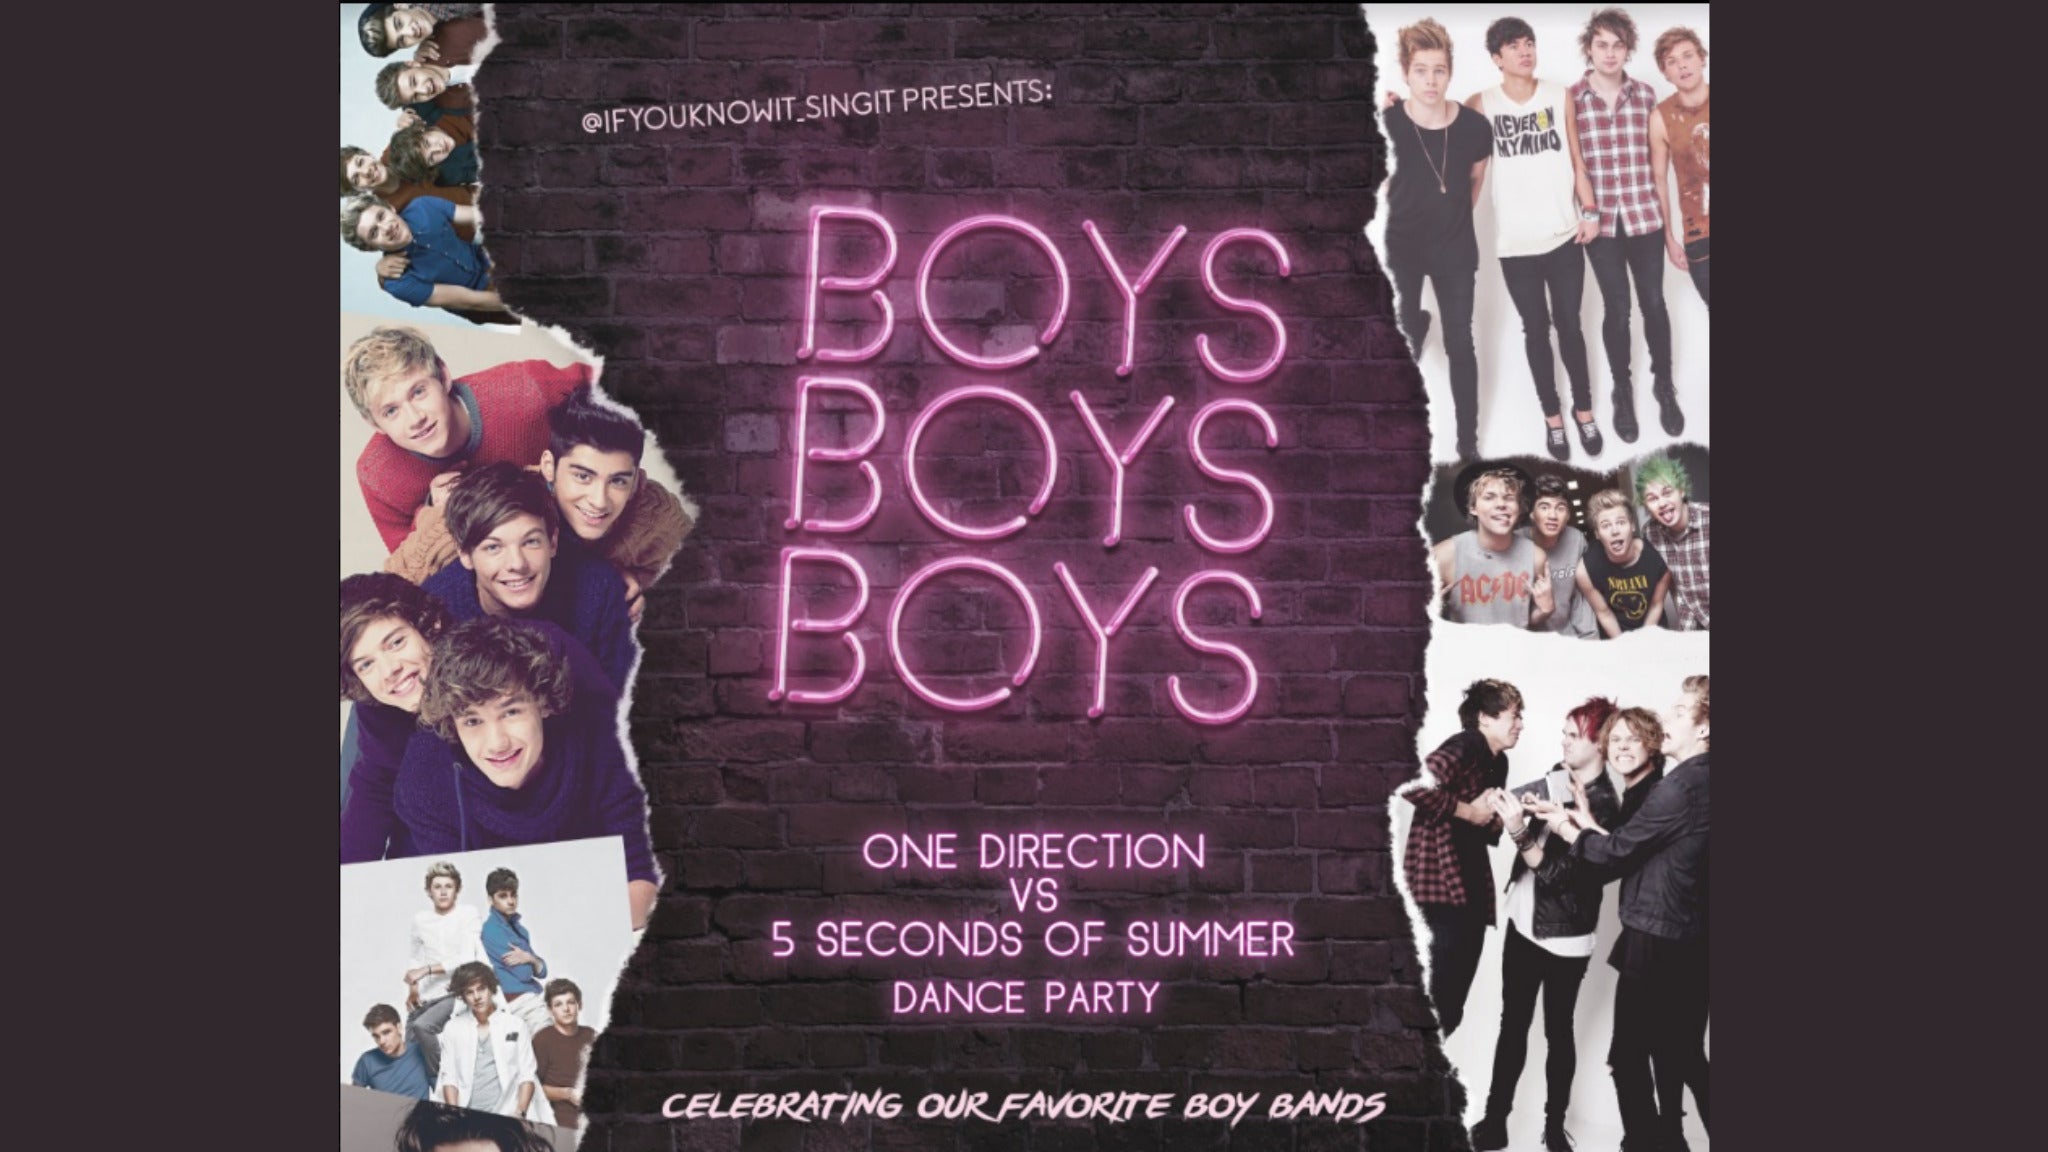 Boys Boys Boys: Celebrating Our Favorite Boy Bands! in Virginia Beach promo photo for Day Of Show presale offer code